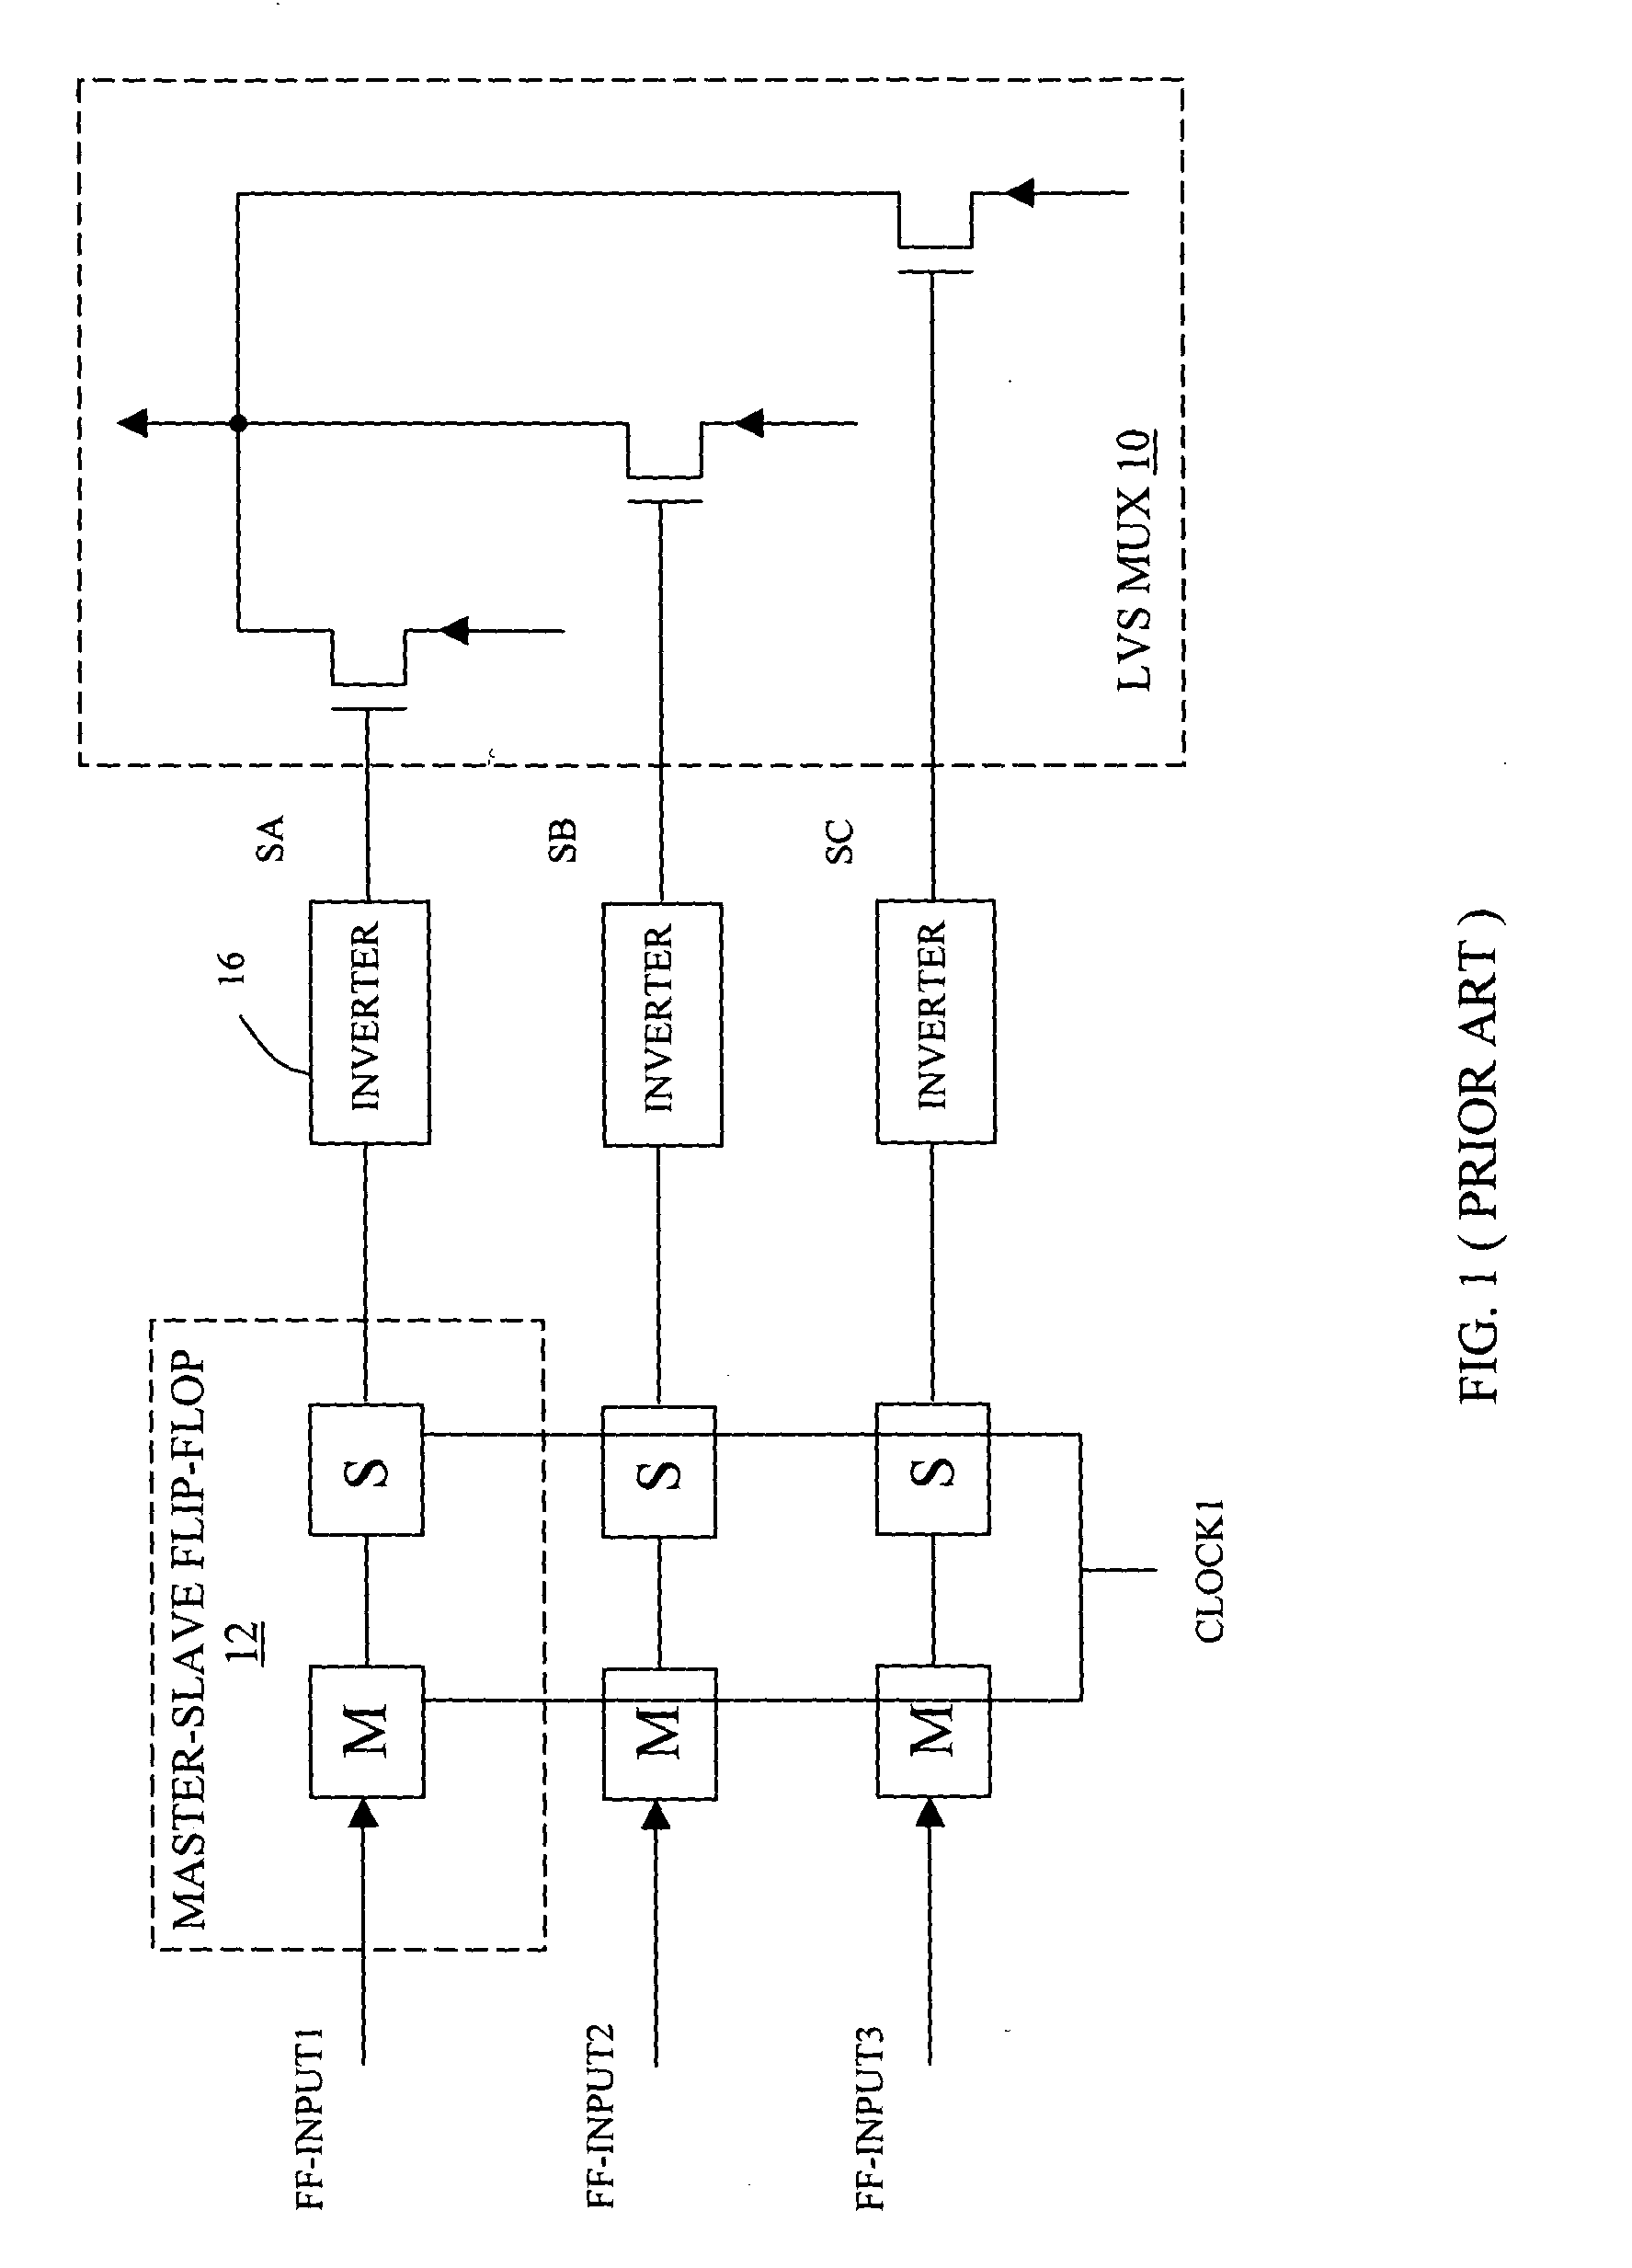 Select logic for low voltage swing circuits